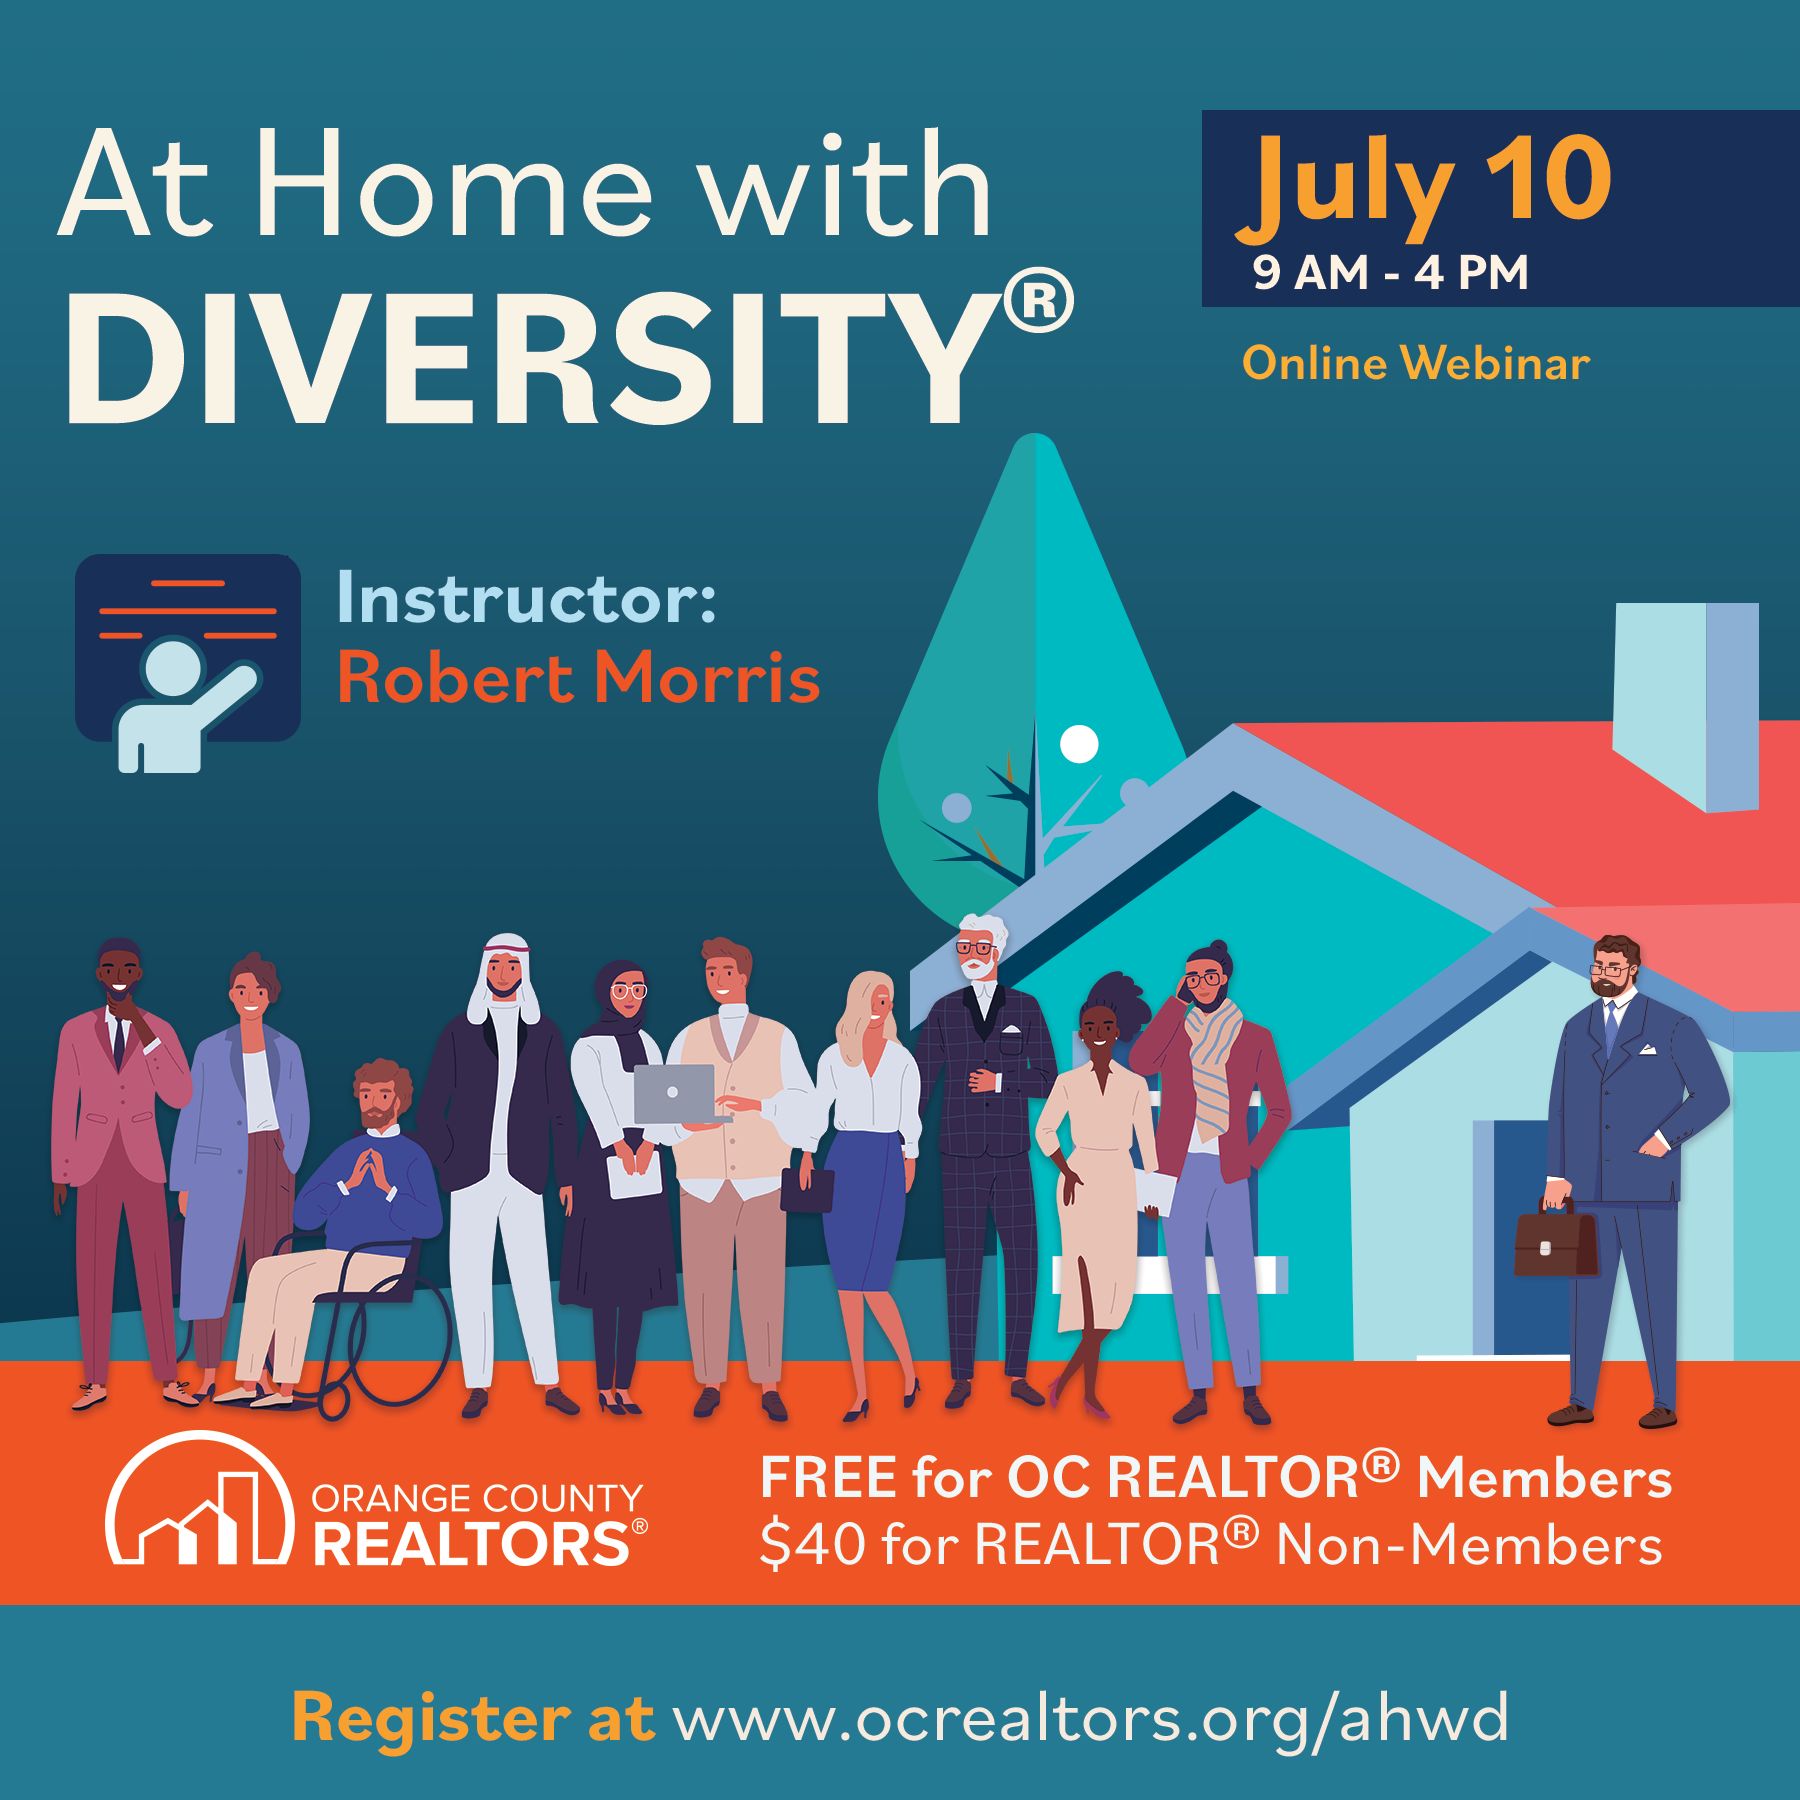 At Home with Diversity (AHWD)